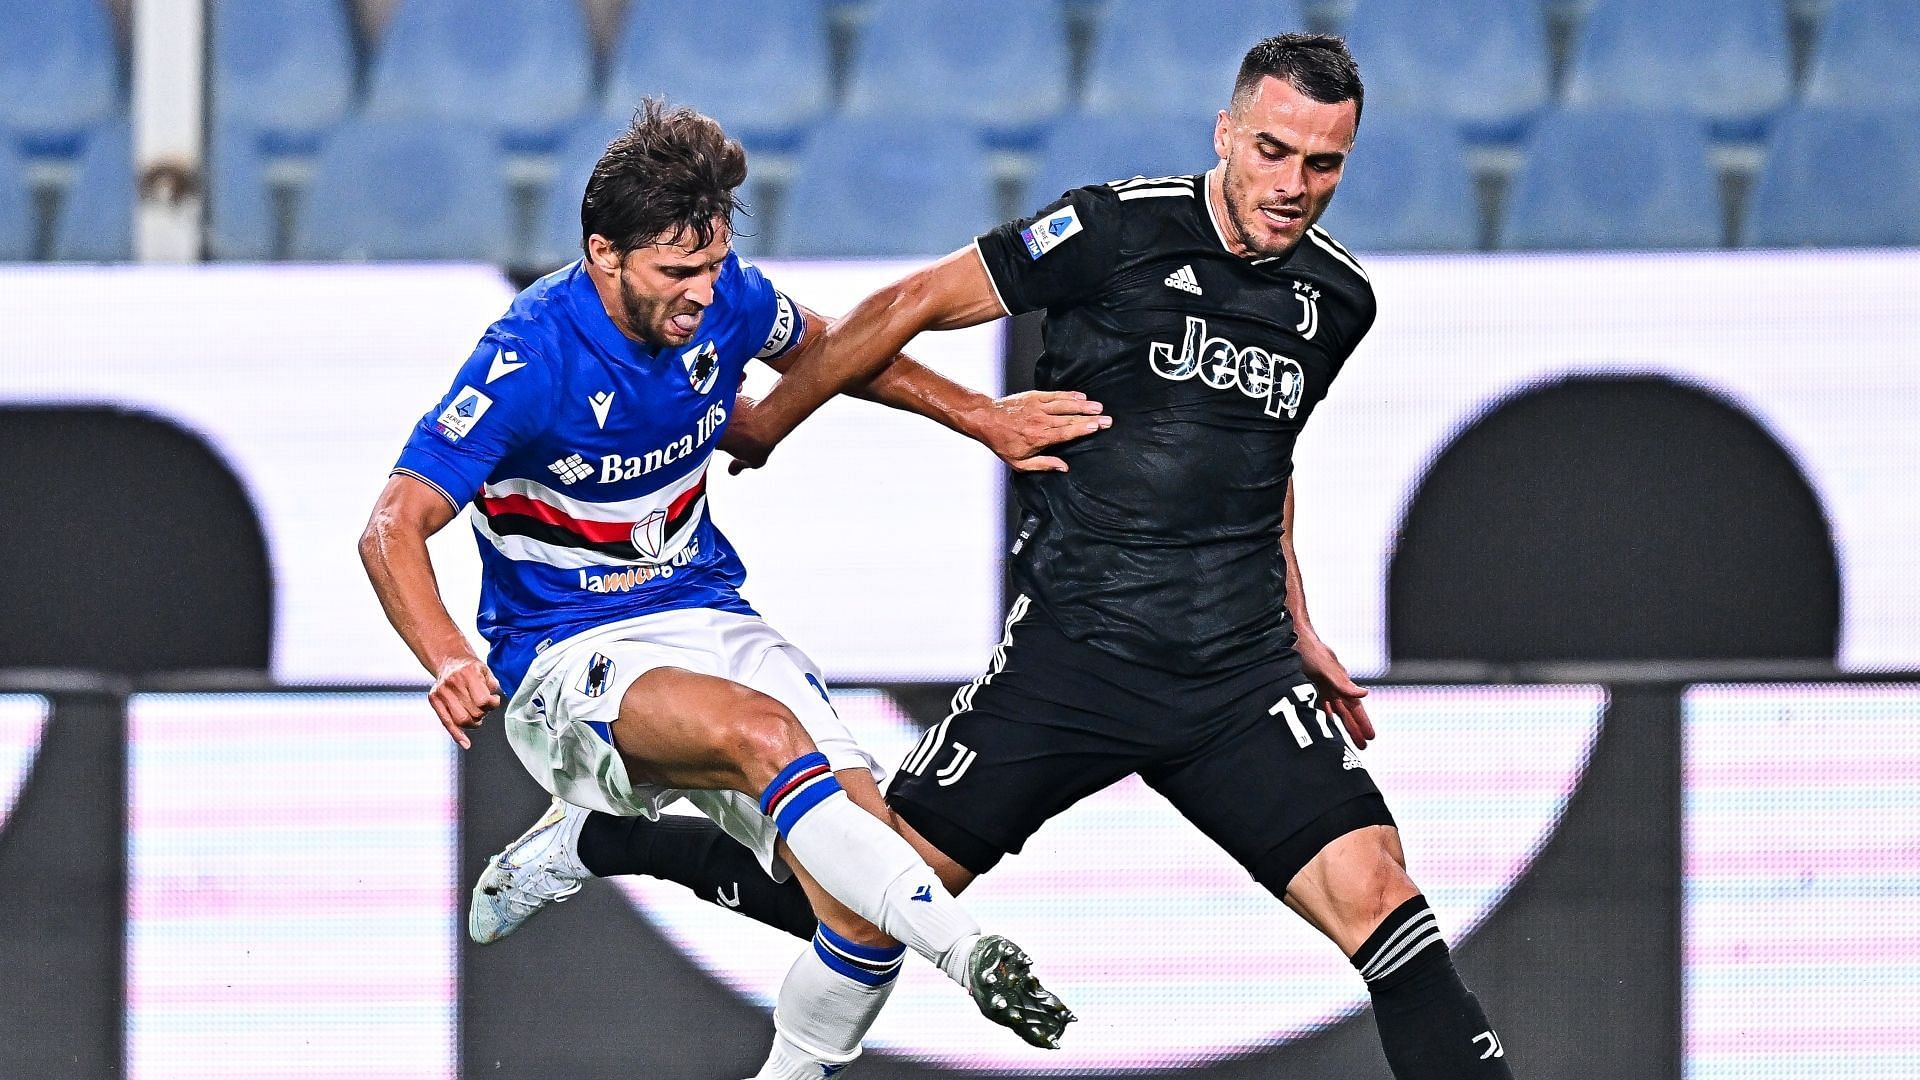 Juventus and Sampdoria will lock horns in Serie A on Sunday